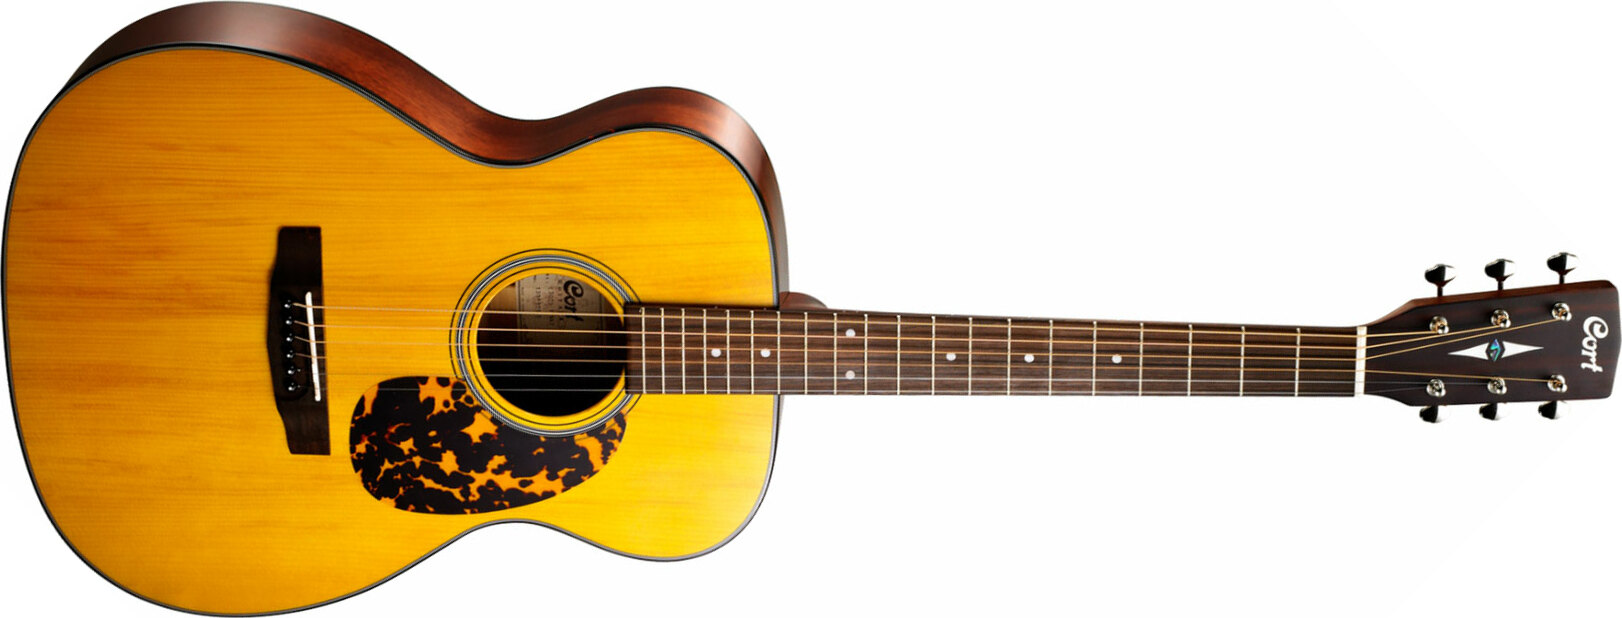 Cort Luce L300vf Orchestra Model Om Epicea Acajou Ova - Natural Glossy - Electro acoustic guitar - Main picture